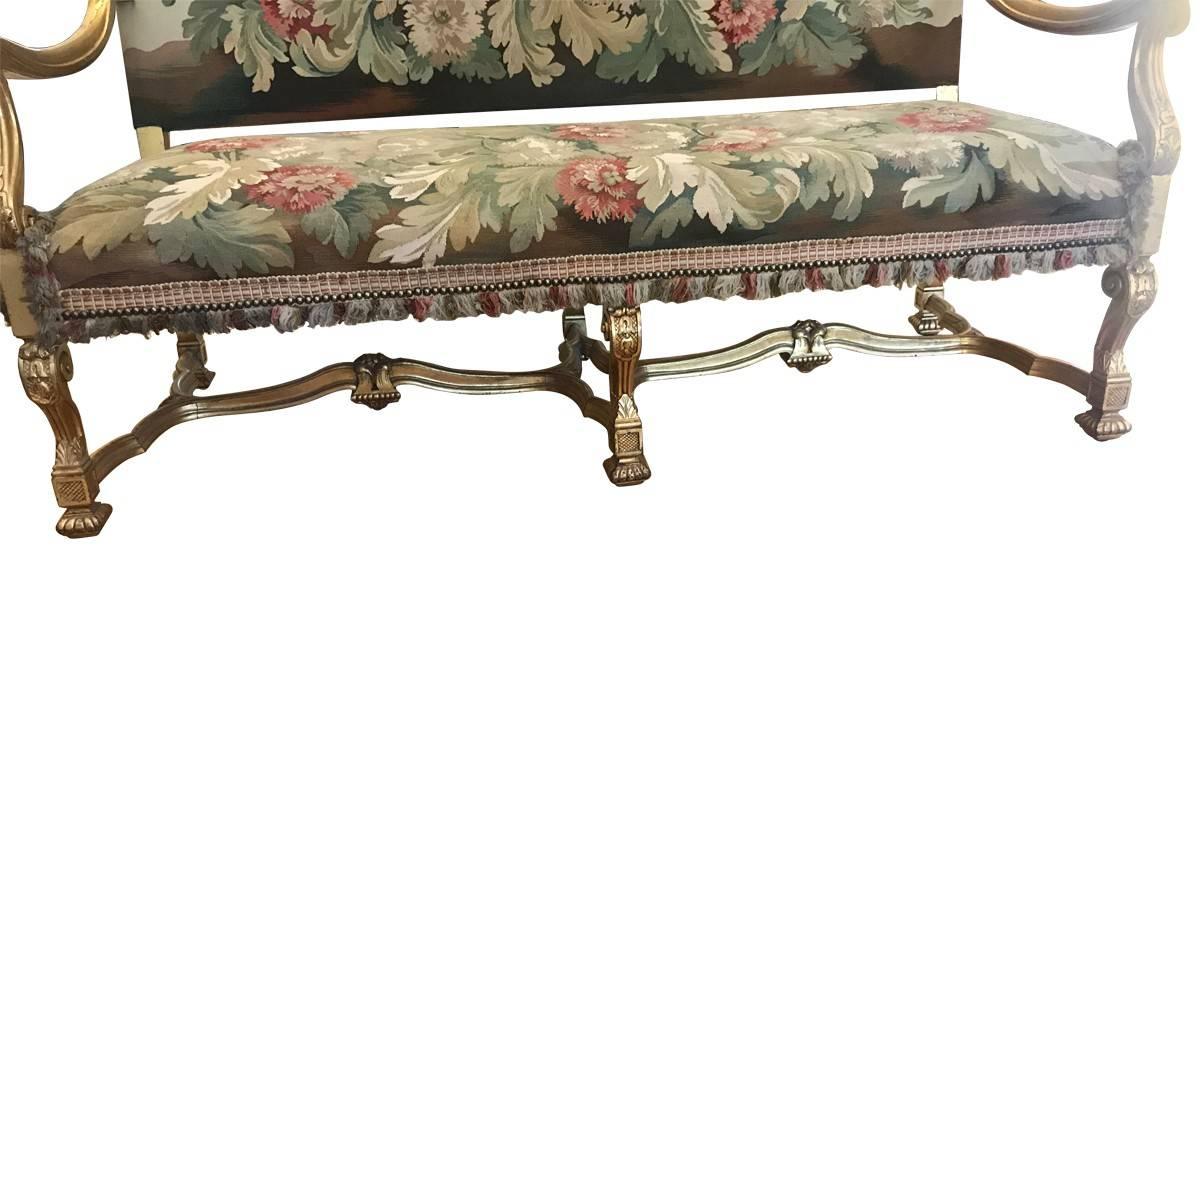 A collectible piece from bygone days, featuring the finest craftsmanship, materials, and design elements of its given era. Elegant and ornate, this stunning Aubusson settee features a hand-carved giltwood frame and Aubisson upholstery. Made in